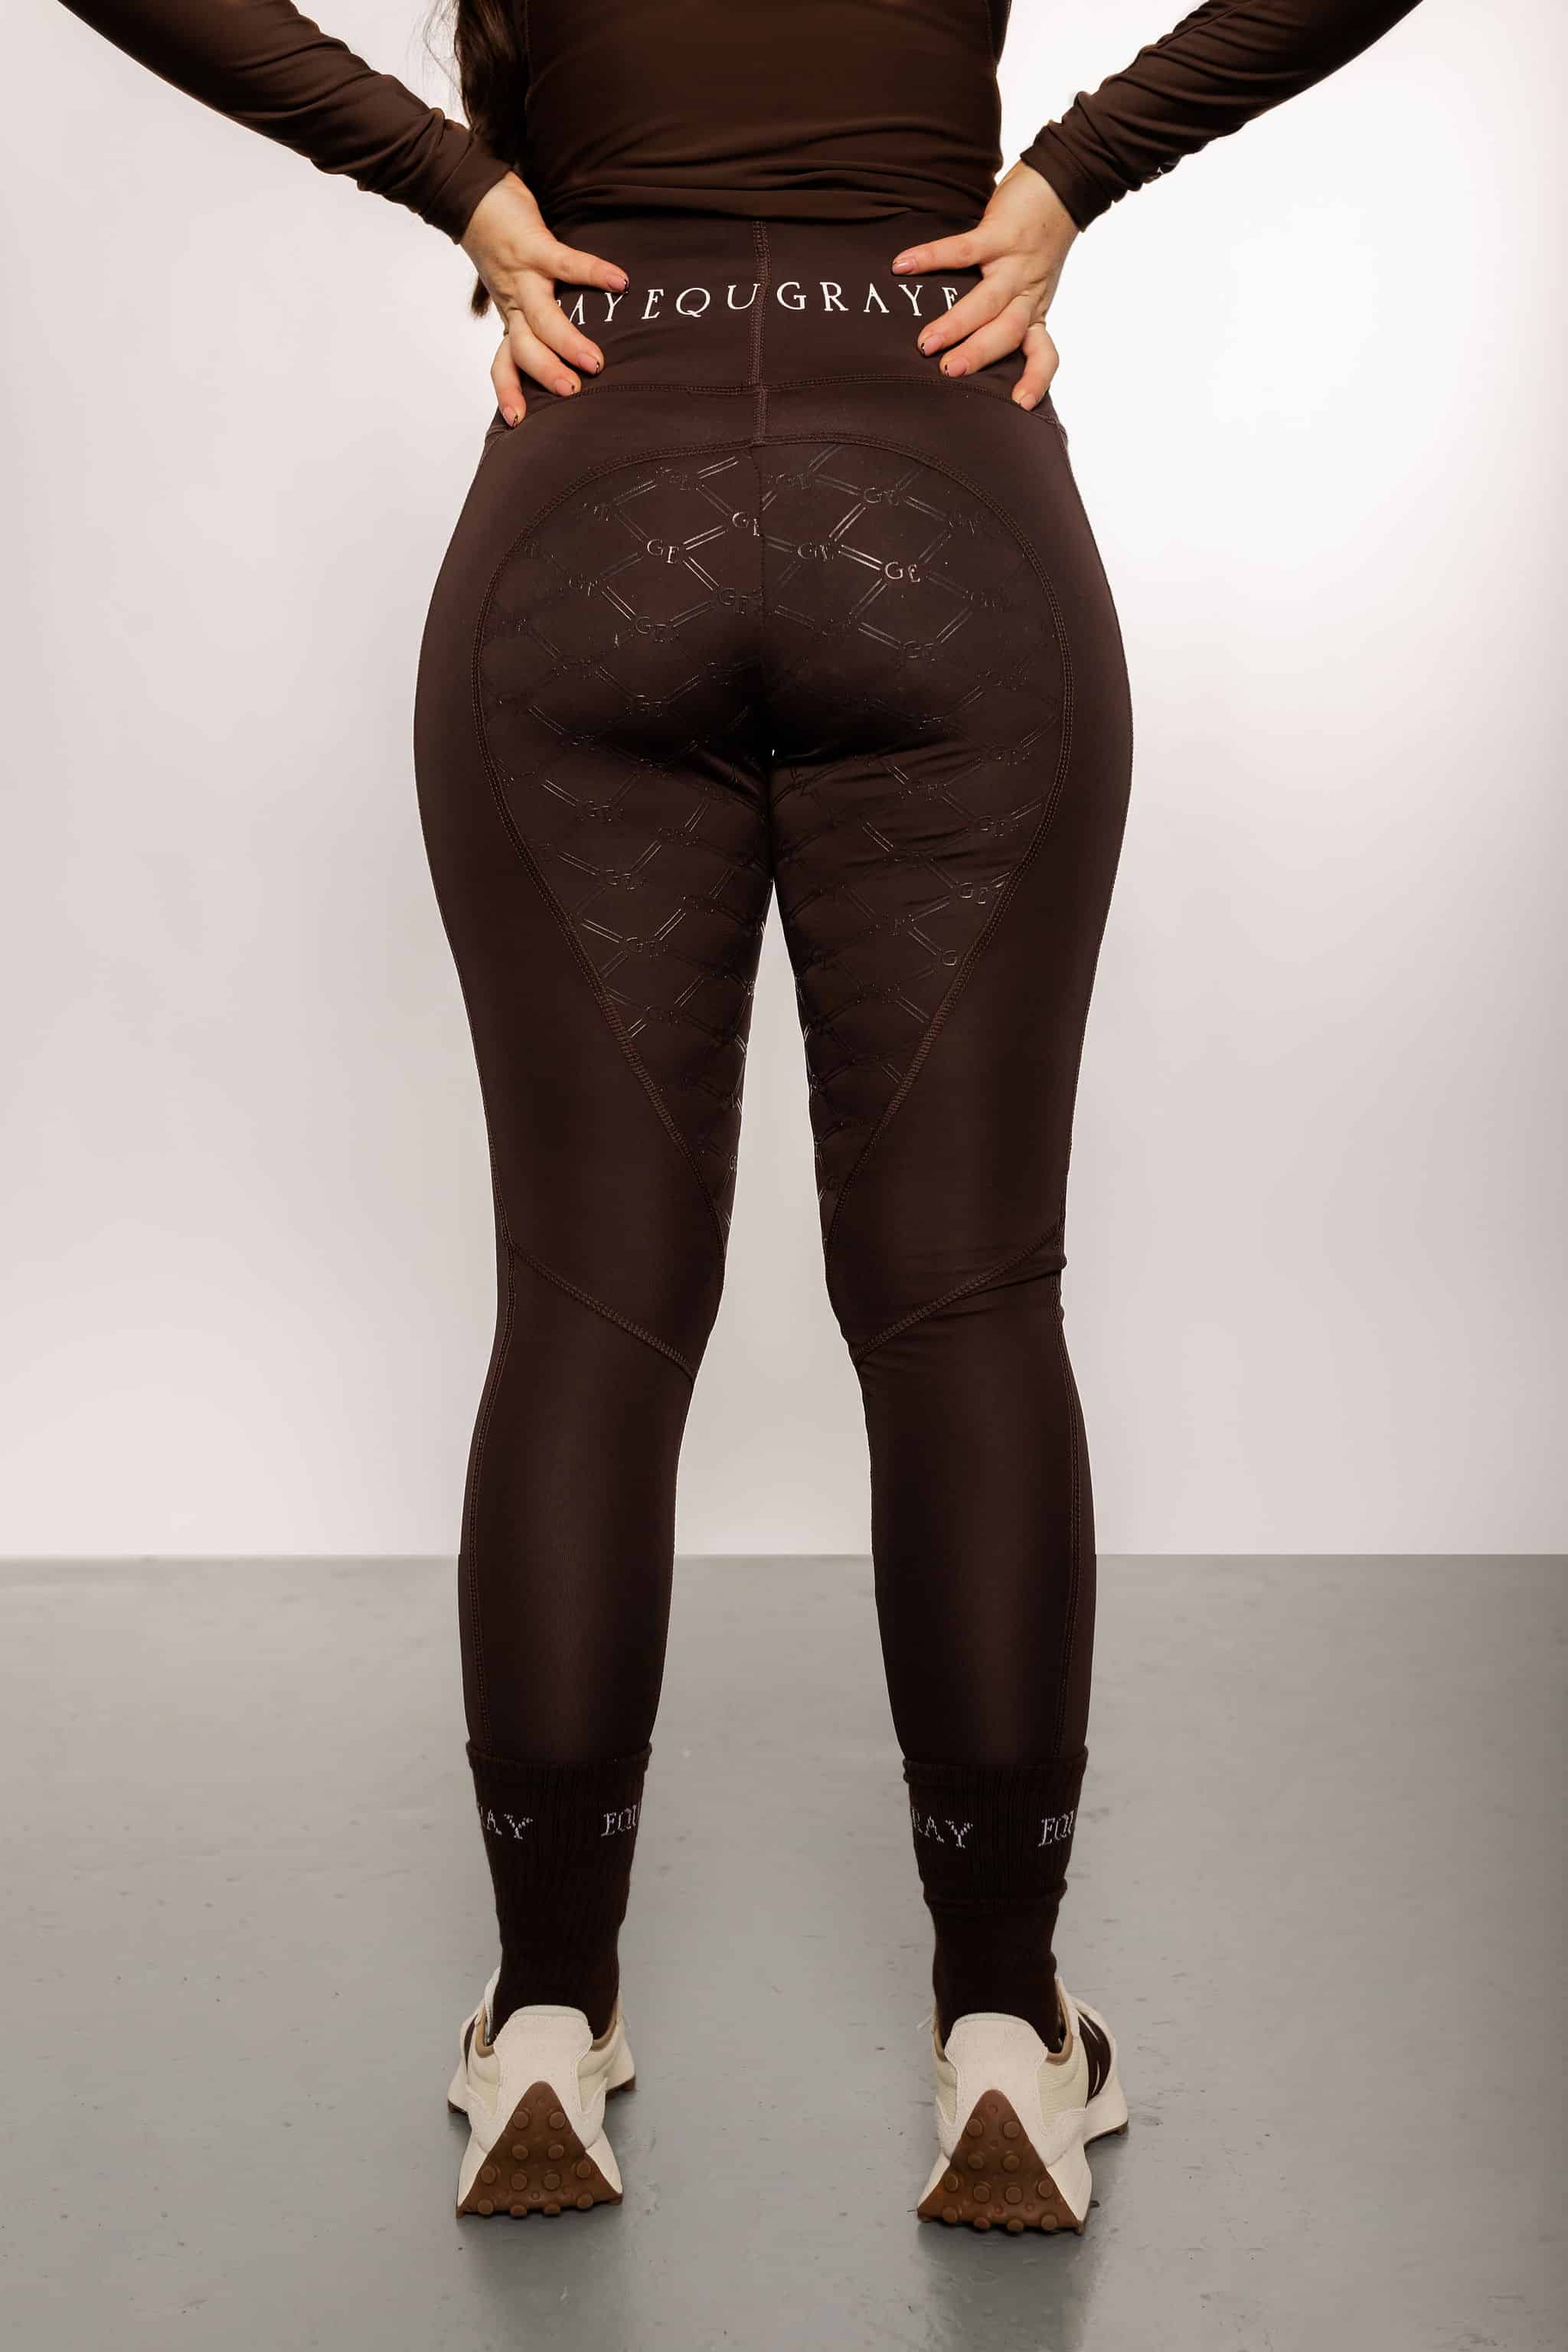 A view of the back of our brown fleece lined riding leggings with full non-slip seat.